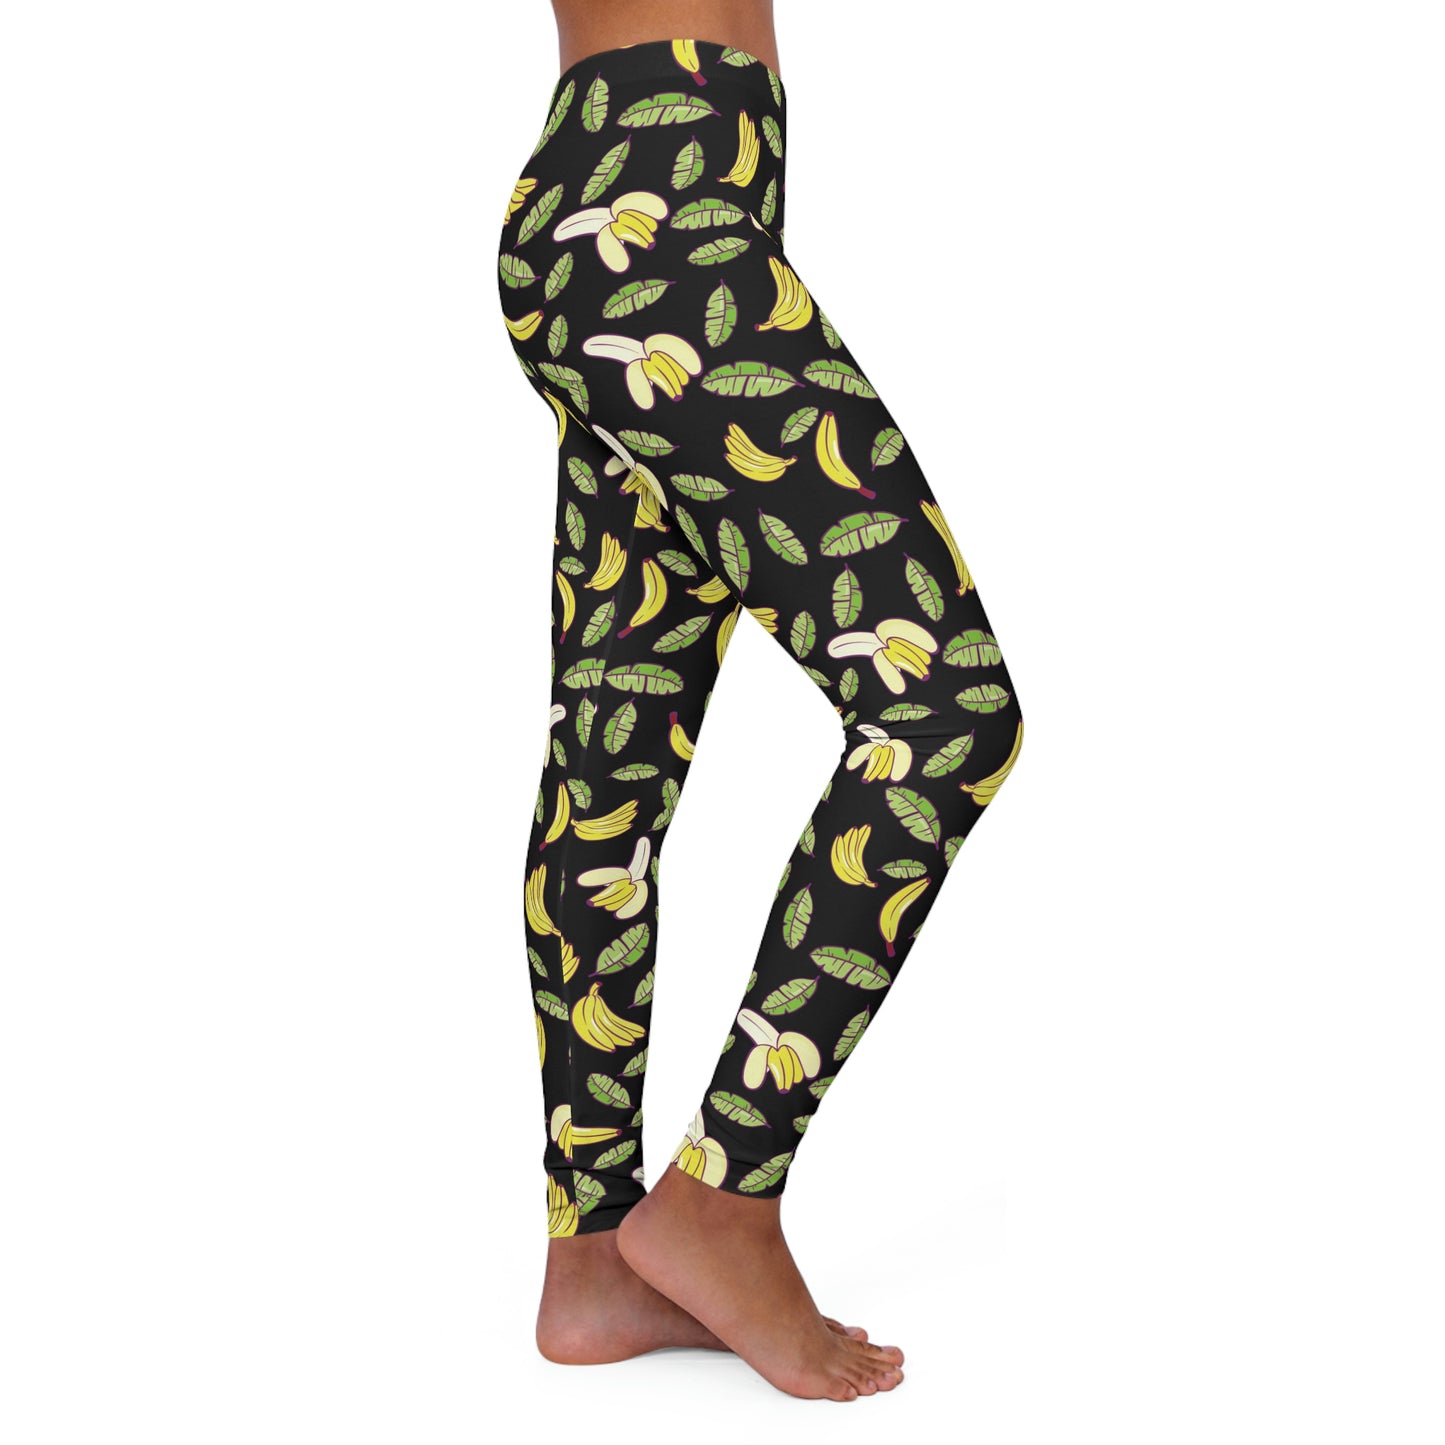 Women's Bananas Fruit Women Leggings, One of a Kind Gift - Unique Workout Activewear tights for Wife, Girlfriend, Mothers Day Gift